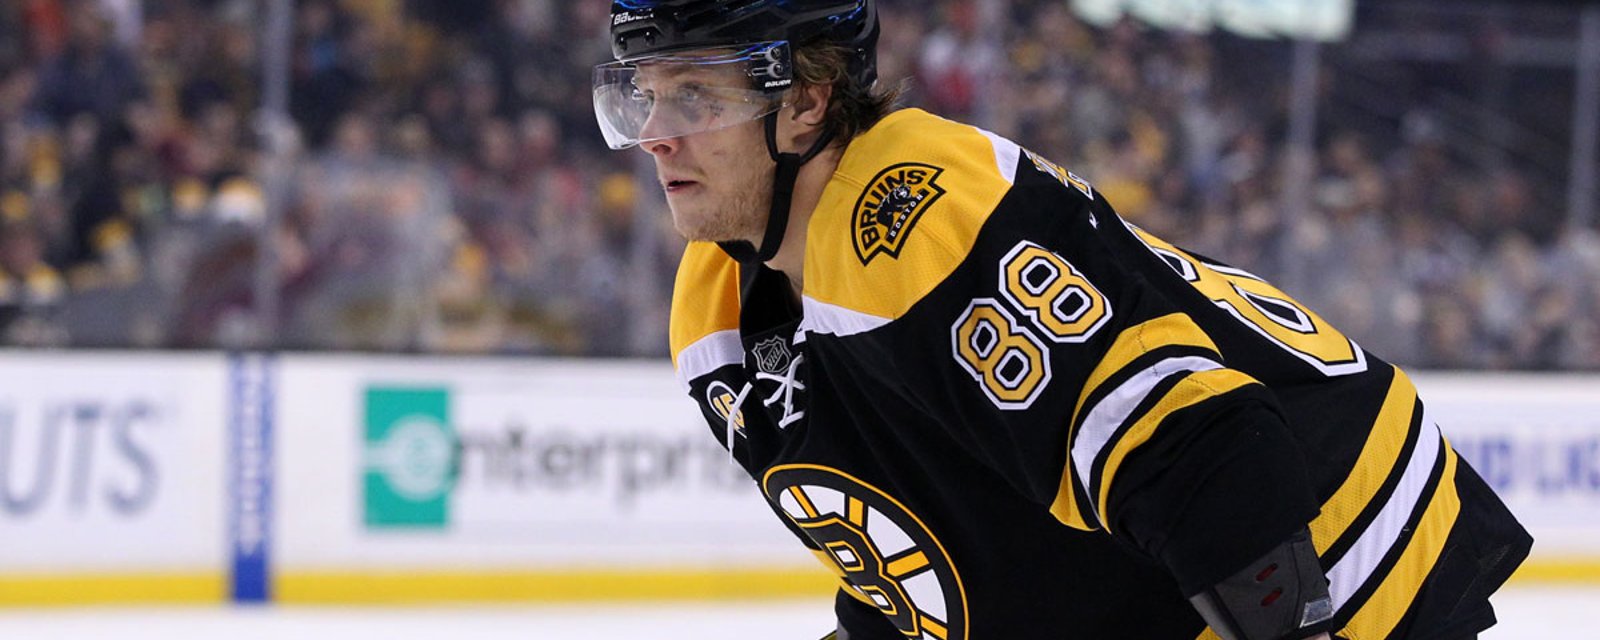 Can the Bruins even afford to lose Pastrnak?